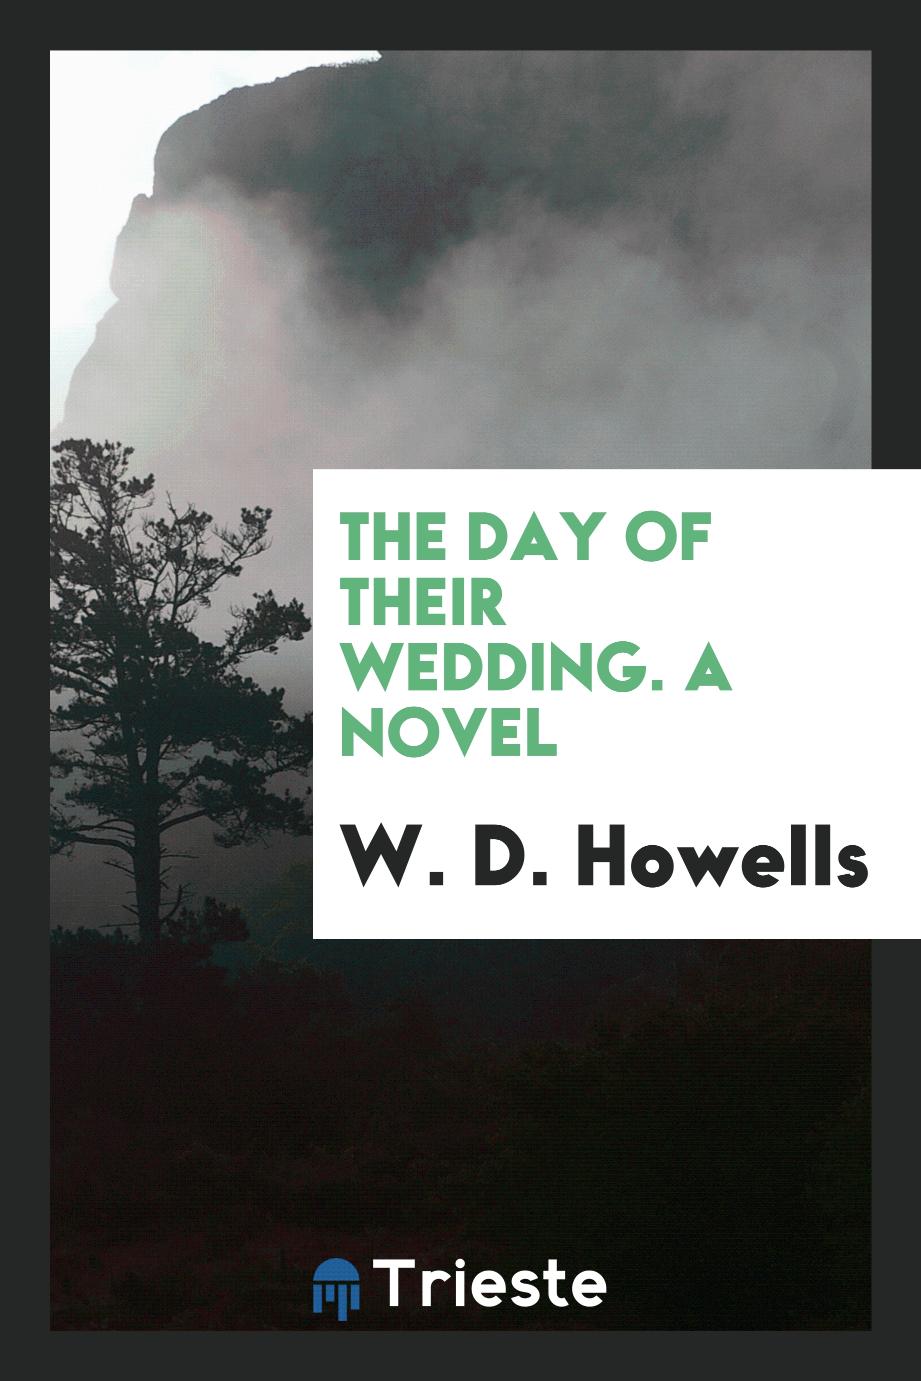 The Day of Their Wedding. A Novel